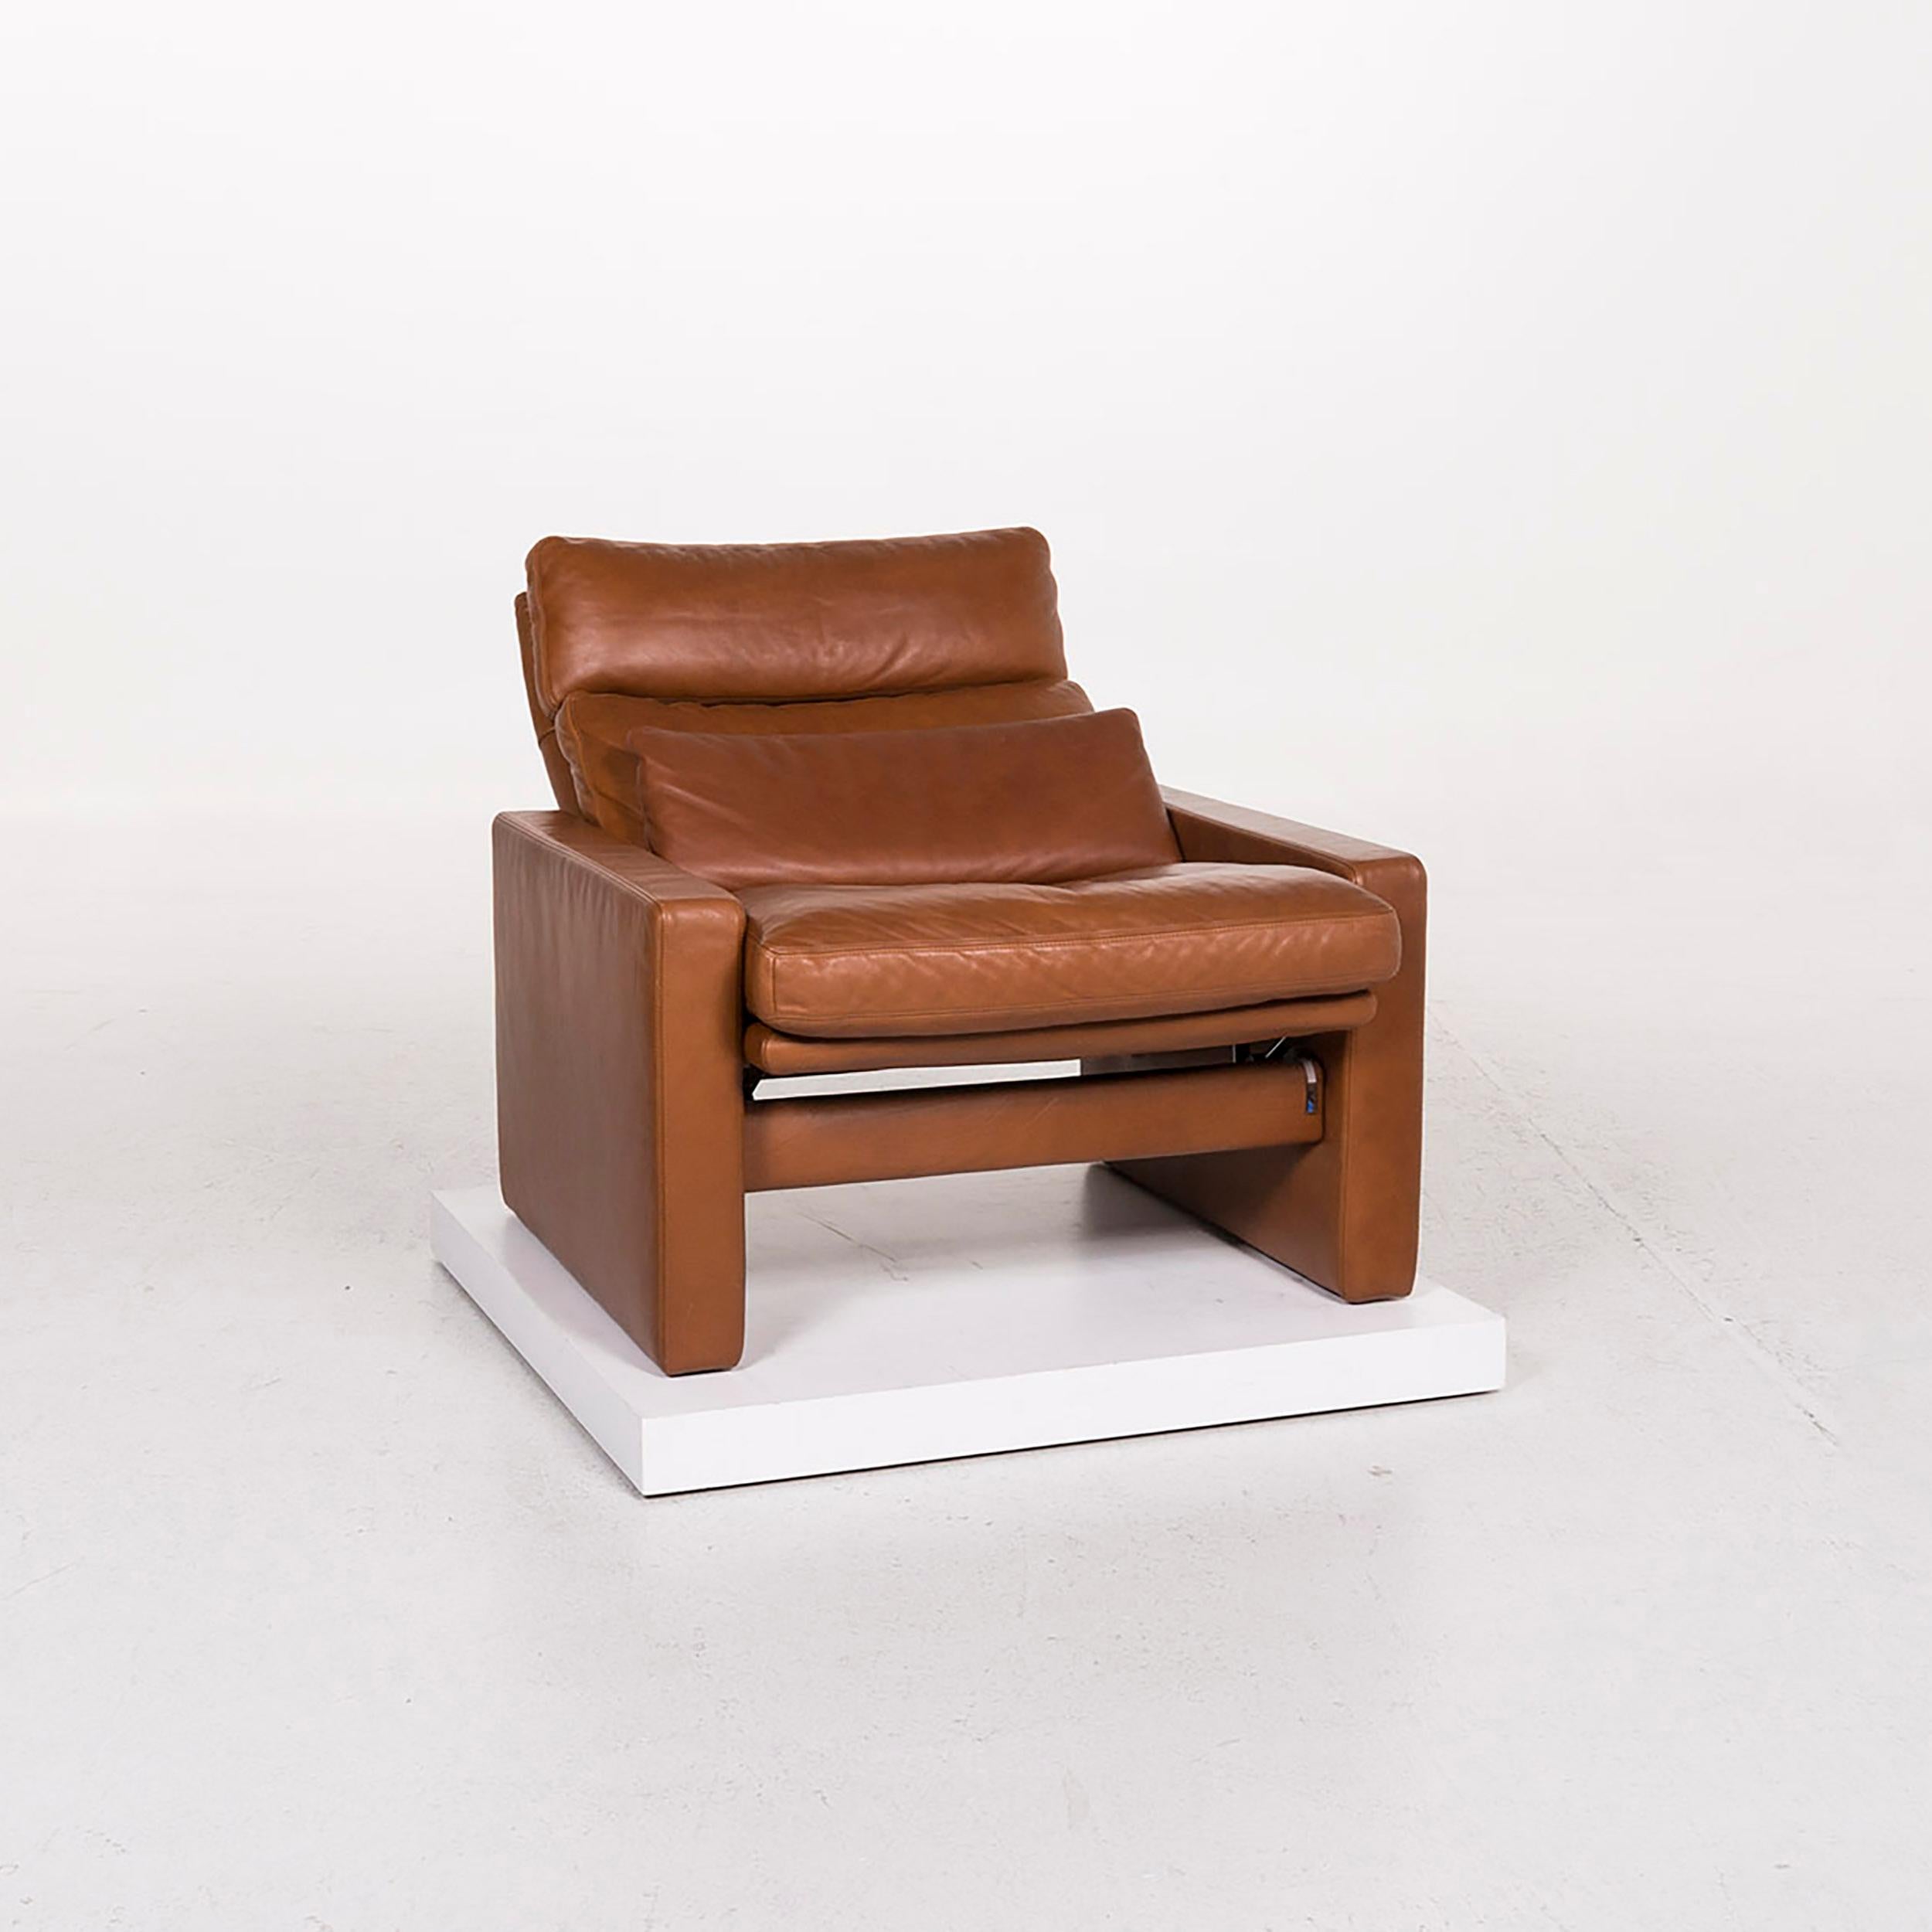 We bring to you an Erpo leather armchair set cognac brown 1x armchair 1x stool.
   
 

 Product measurements in centimeters:
 

Depth 85
Width 91
Height 54
Seat-height 45
Rest-height 51
Seat-depth 45
Seat-width 69
Back-height 50